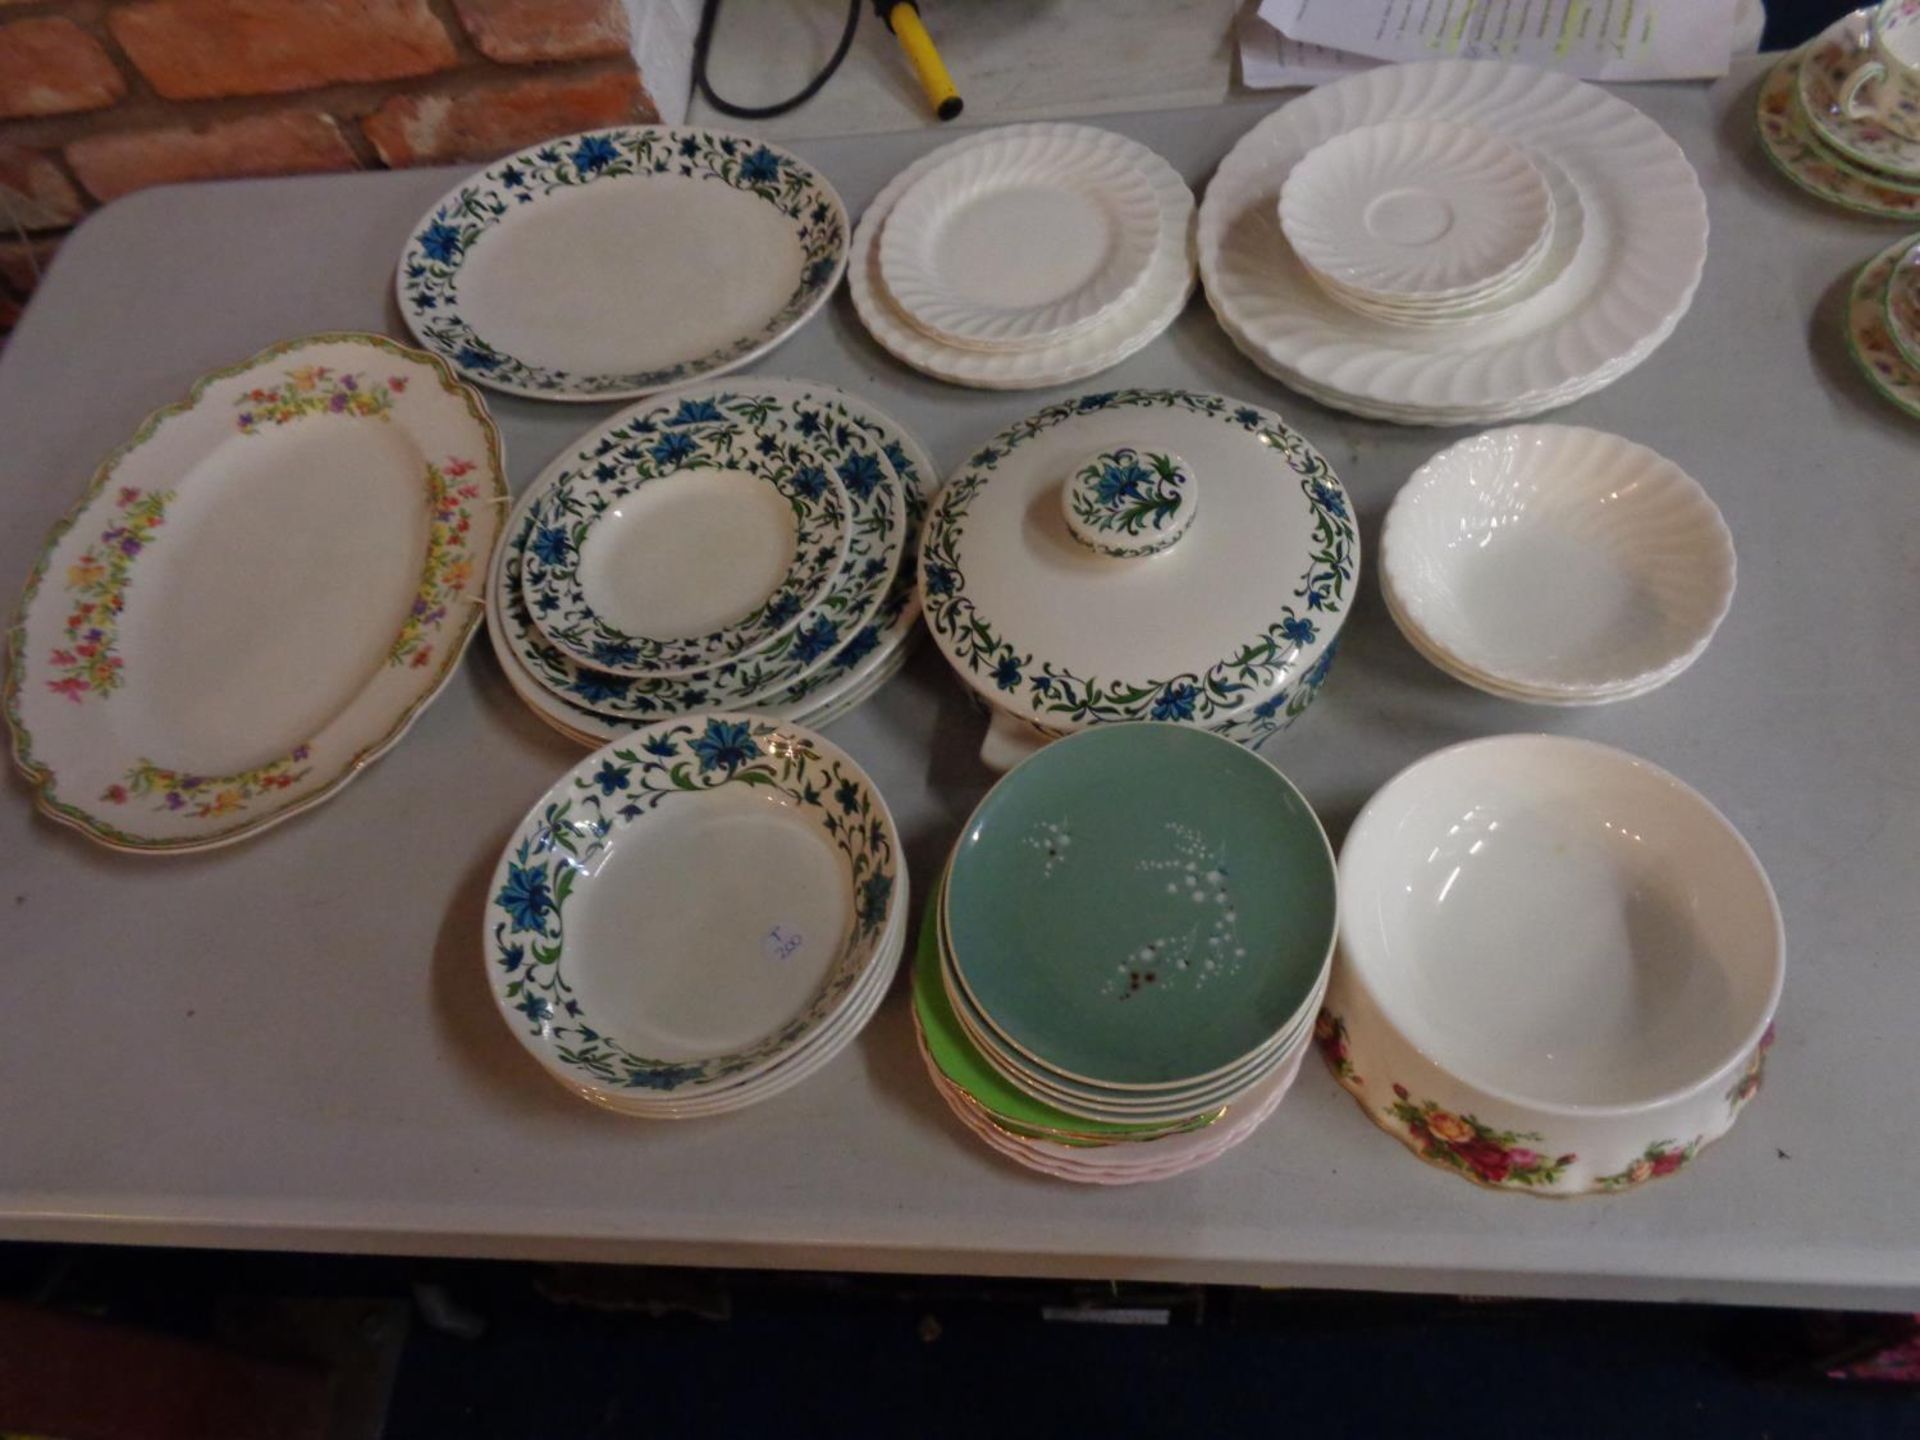 A SELECTION OF DINNERWARE TO INCLUDE A SERVING PLATTER, LIDDED DISH, PLATES, BOWLS AND SIDE PLATES